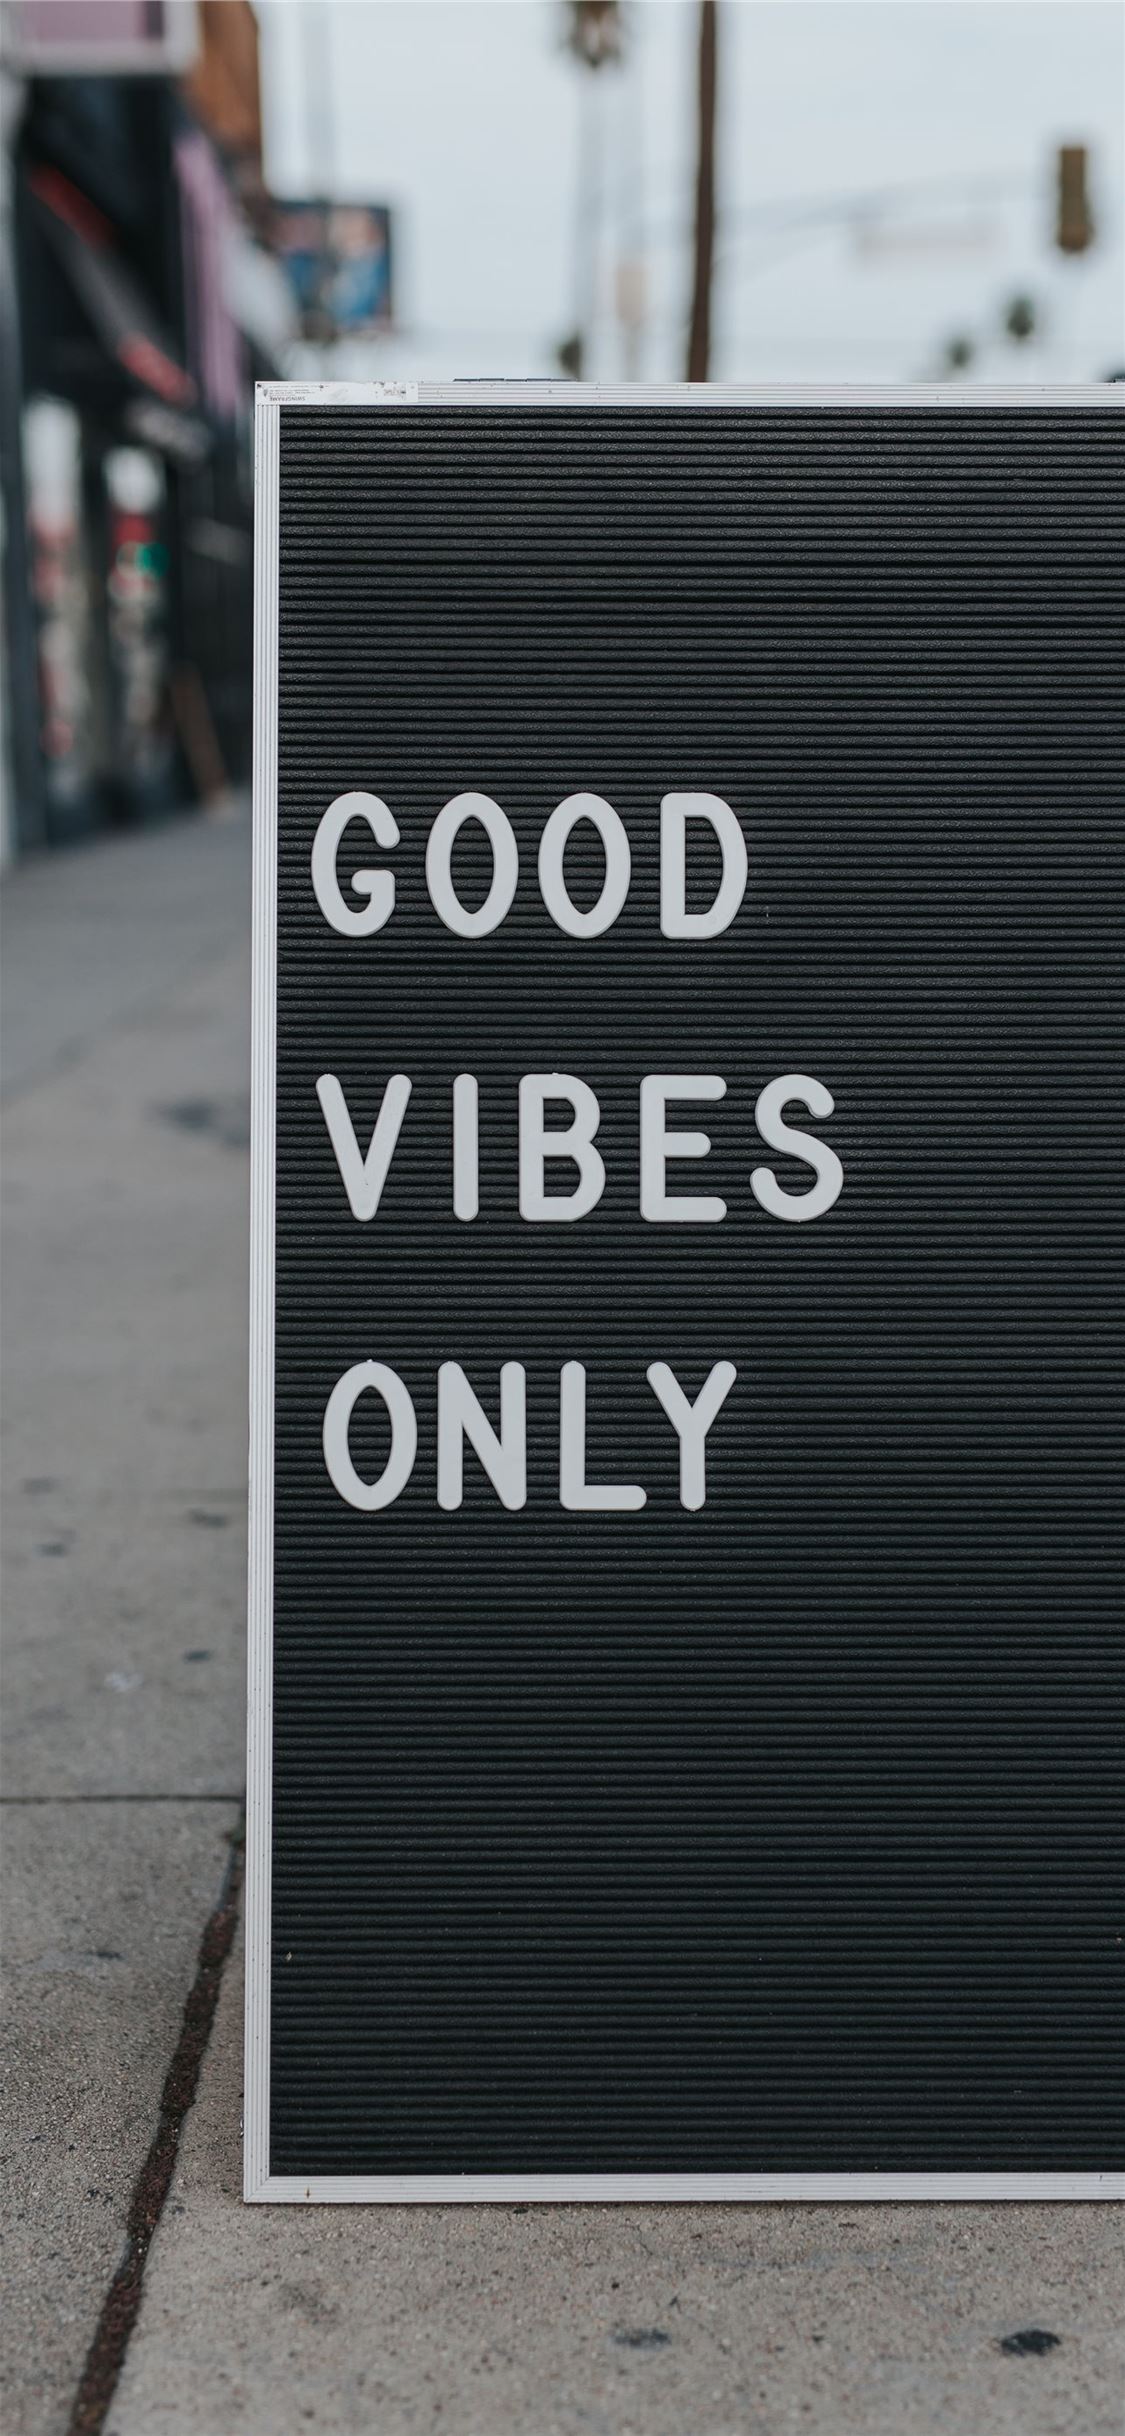 good vibes only text iPhone X wallpaper 